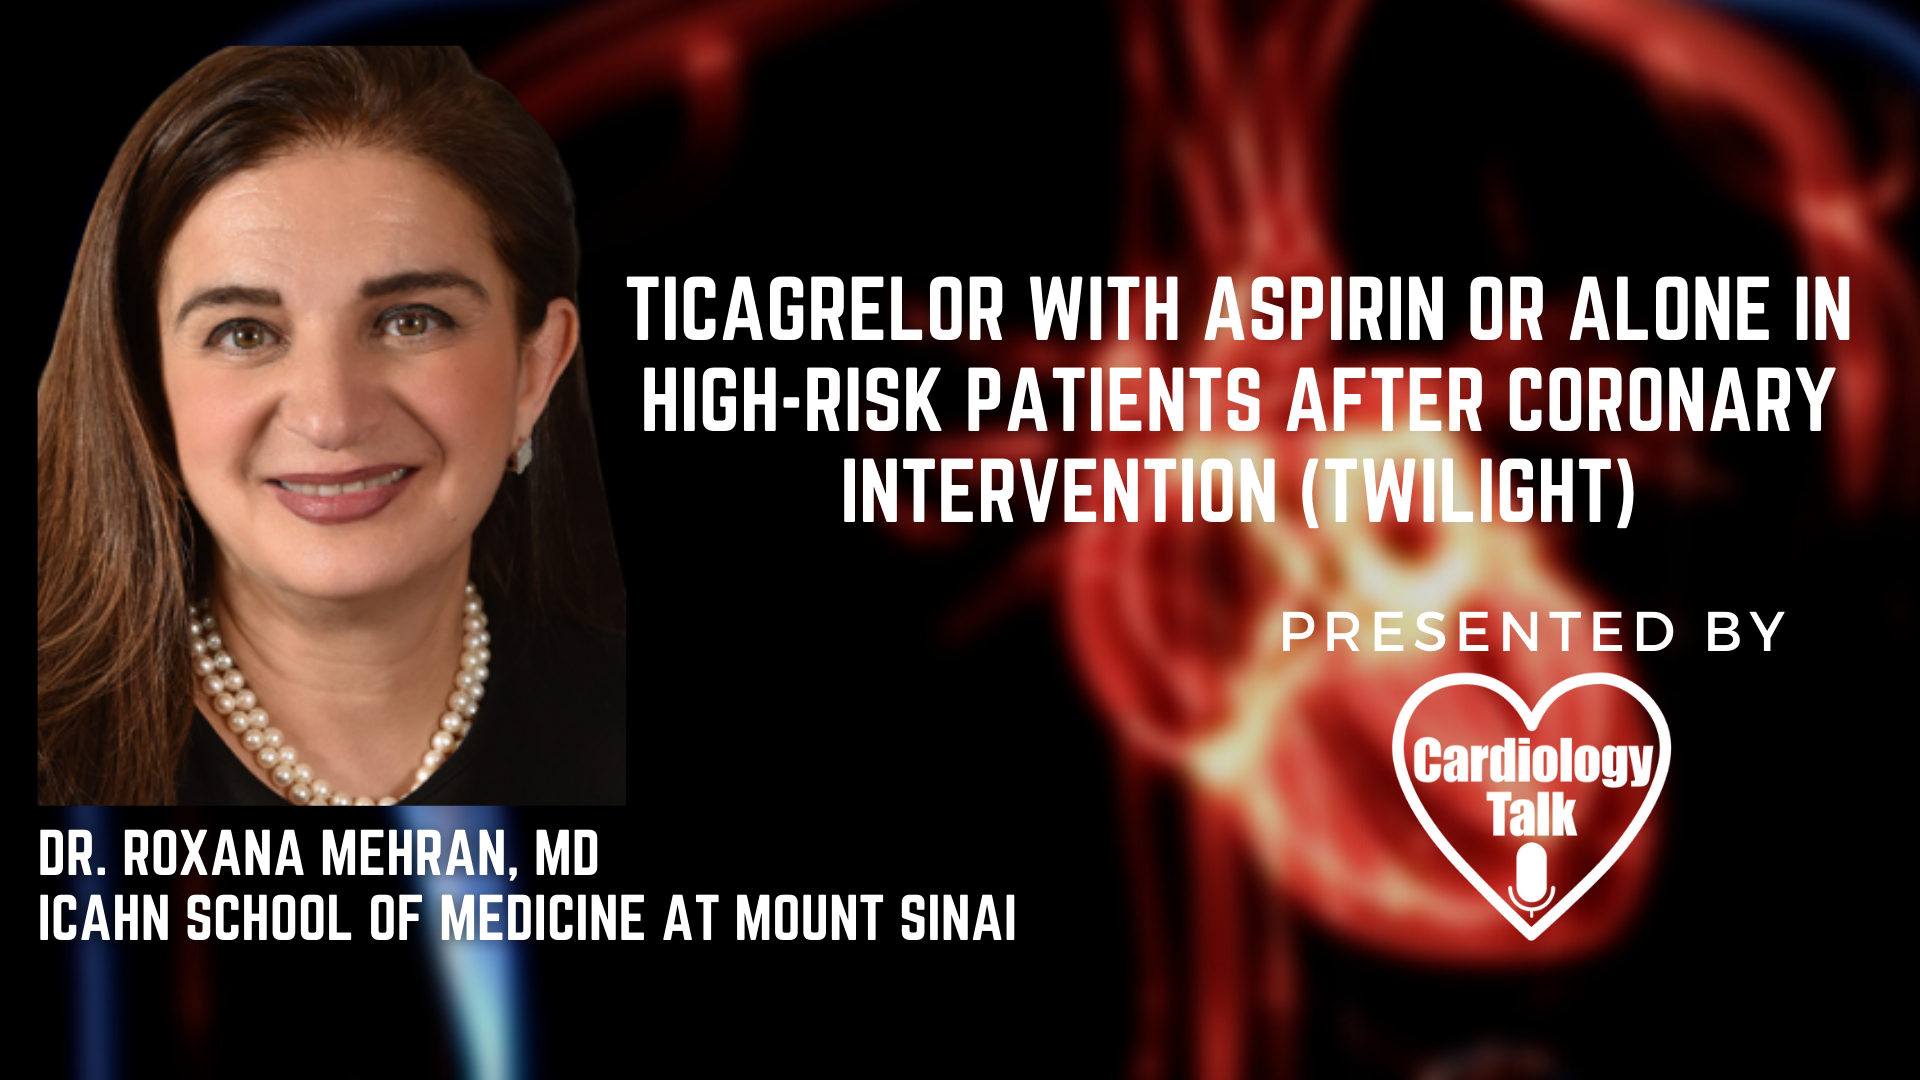 Dr. Roxana Mehran, MD - Ticagrelor With Aspirin or Alone in High-Risk Patients After Coronary Intervention (TWILIGHT) #Drroxmehran #TWILIGHTtrial #CoronaryIntervention #Cardiology #research